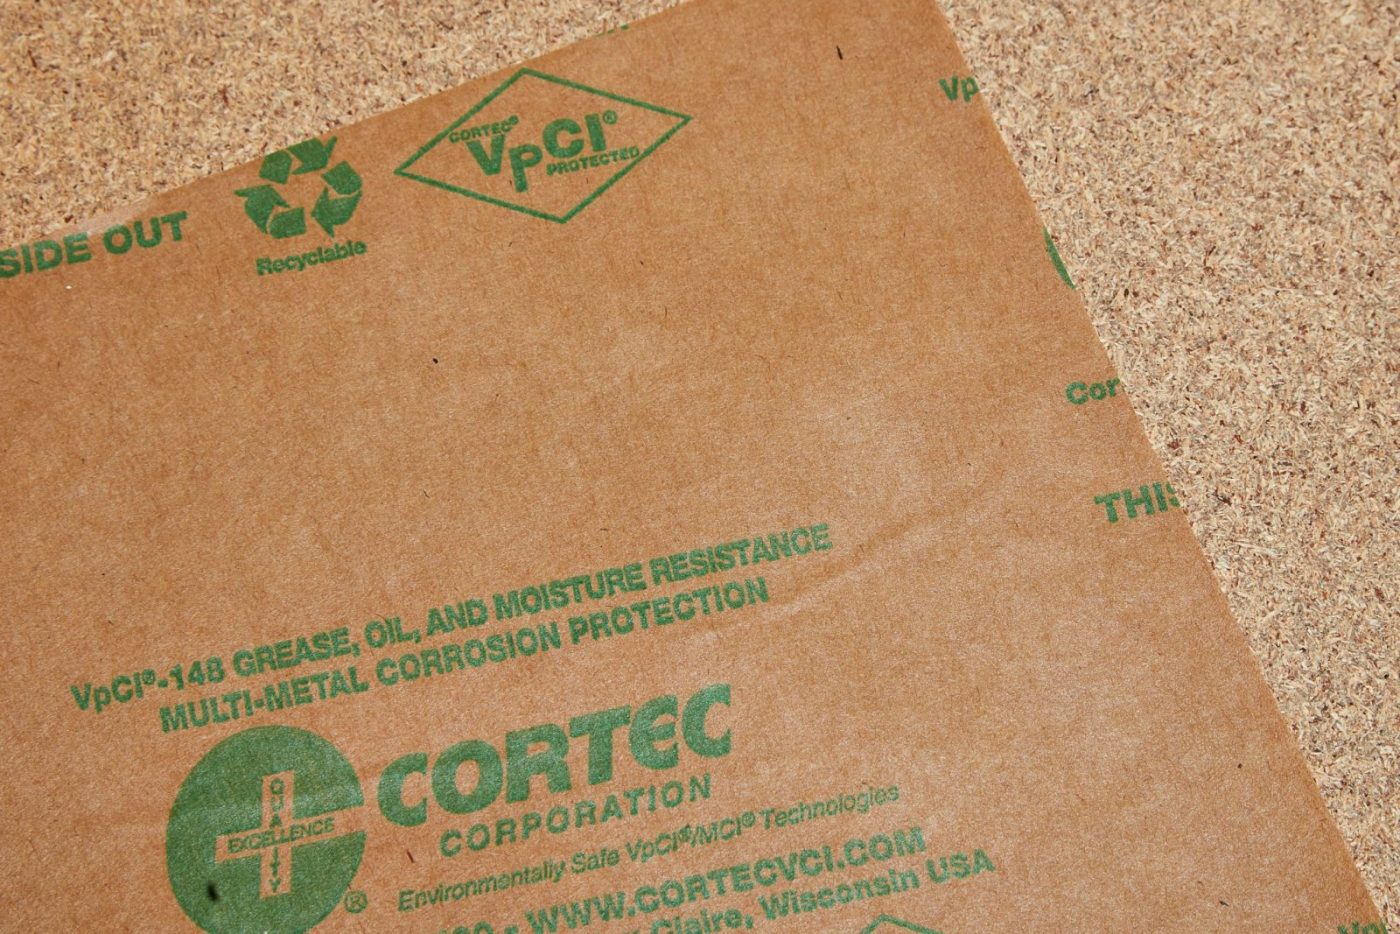 Cortec Oil Resistant Paper VpCI® 148 Grease Resistant Corrosion Inhibiting Paper. Valdamarkdirect.com